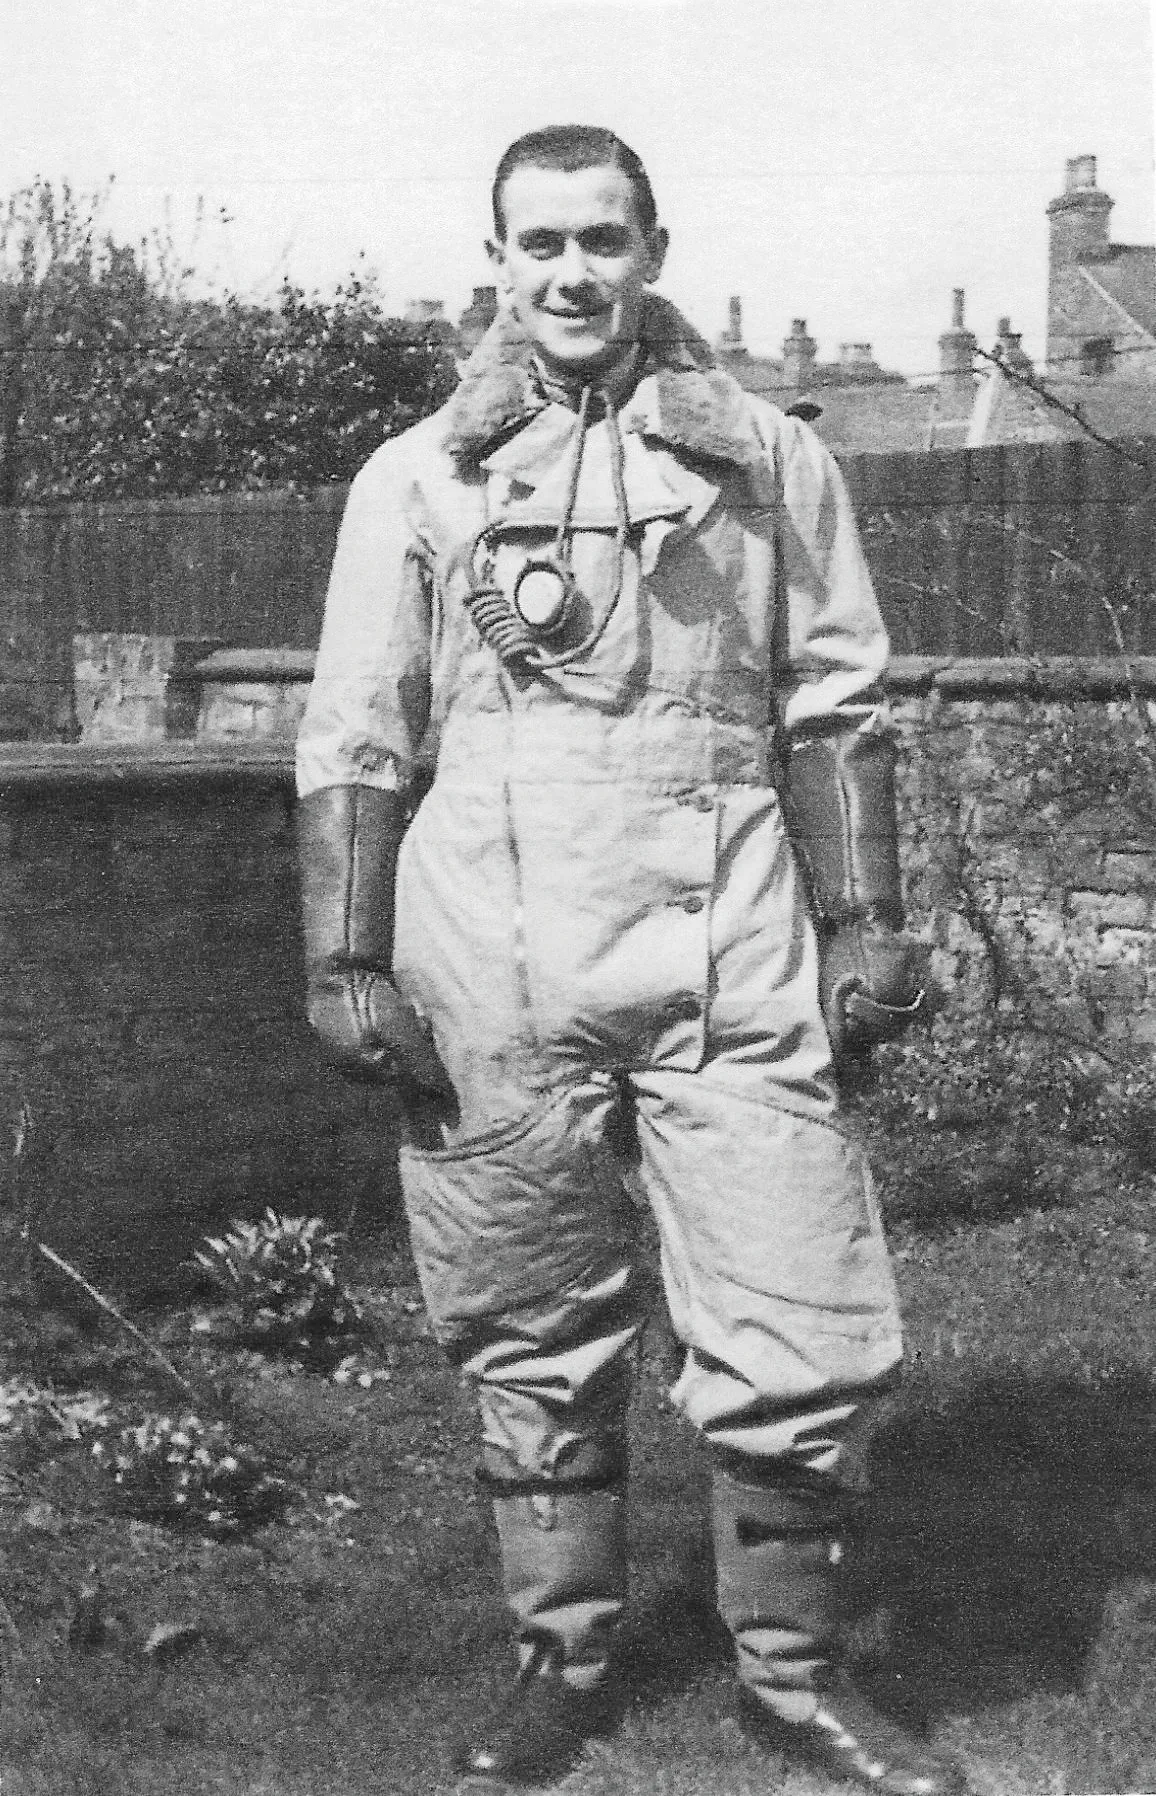 Black and white photograph of a man in Second World War flight gear